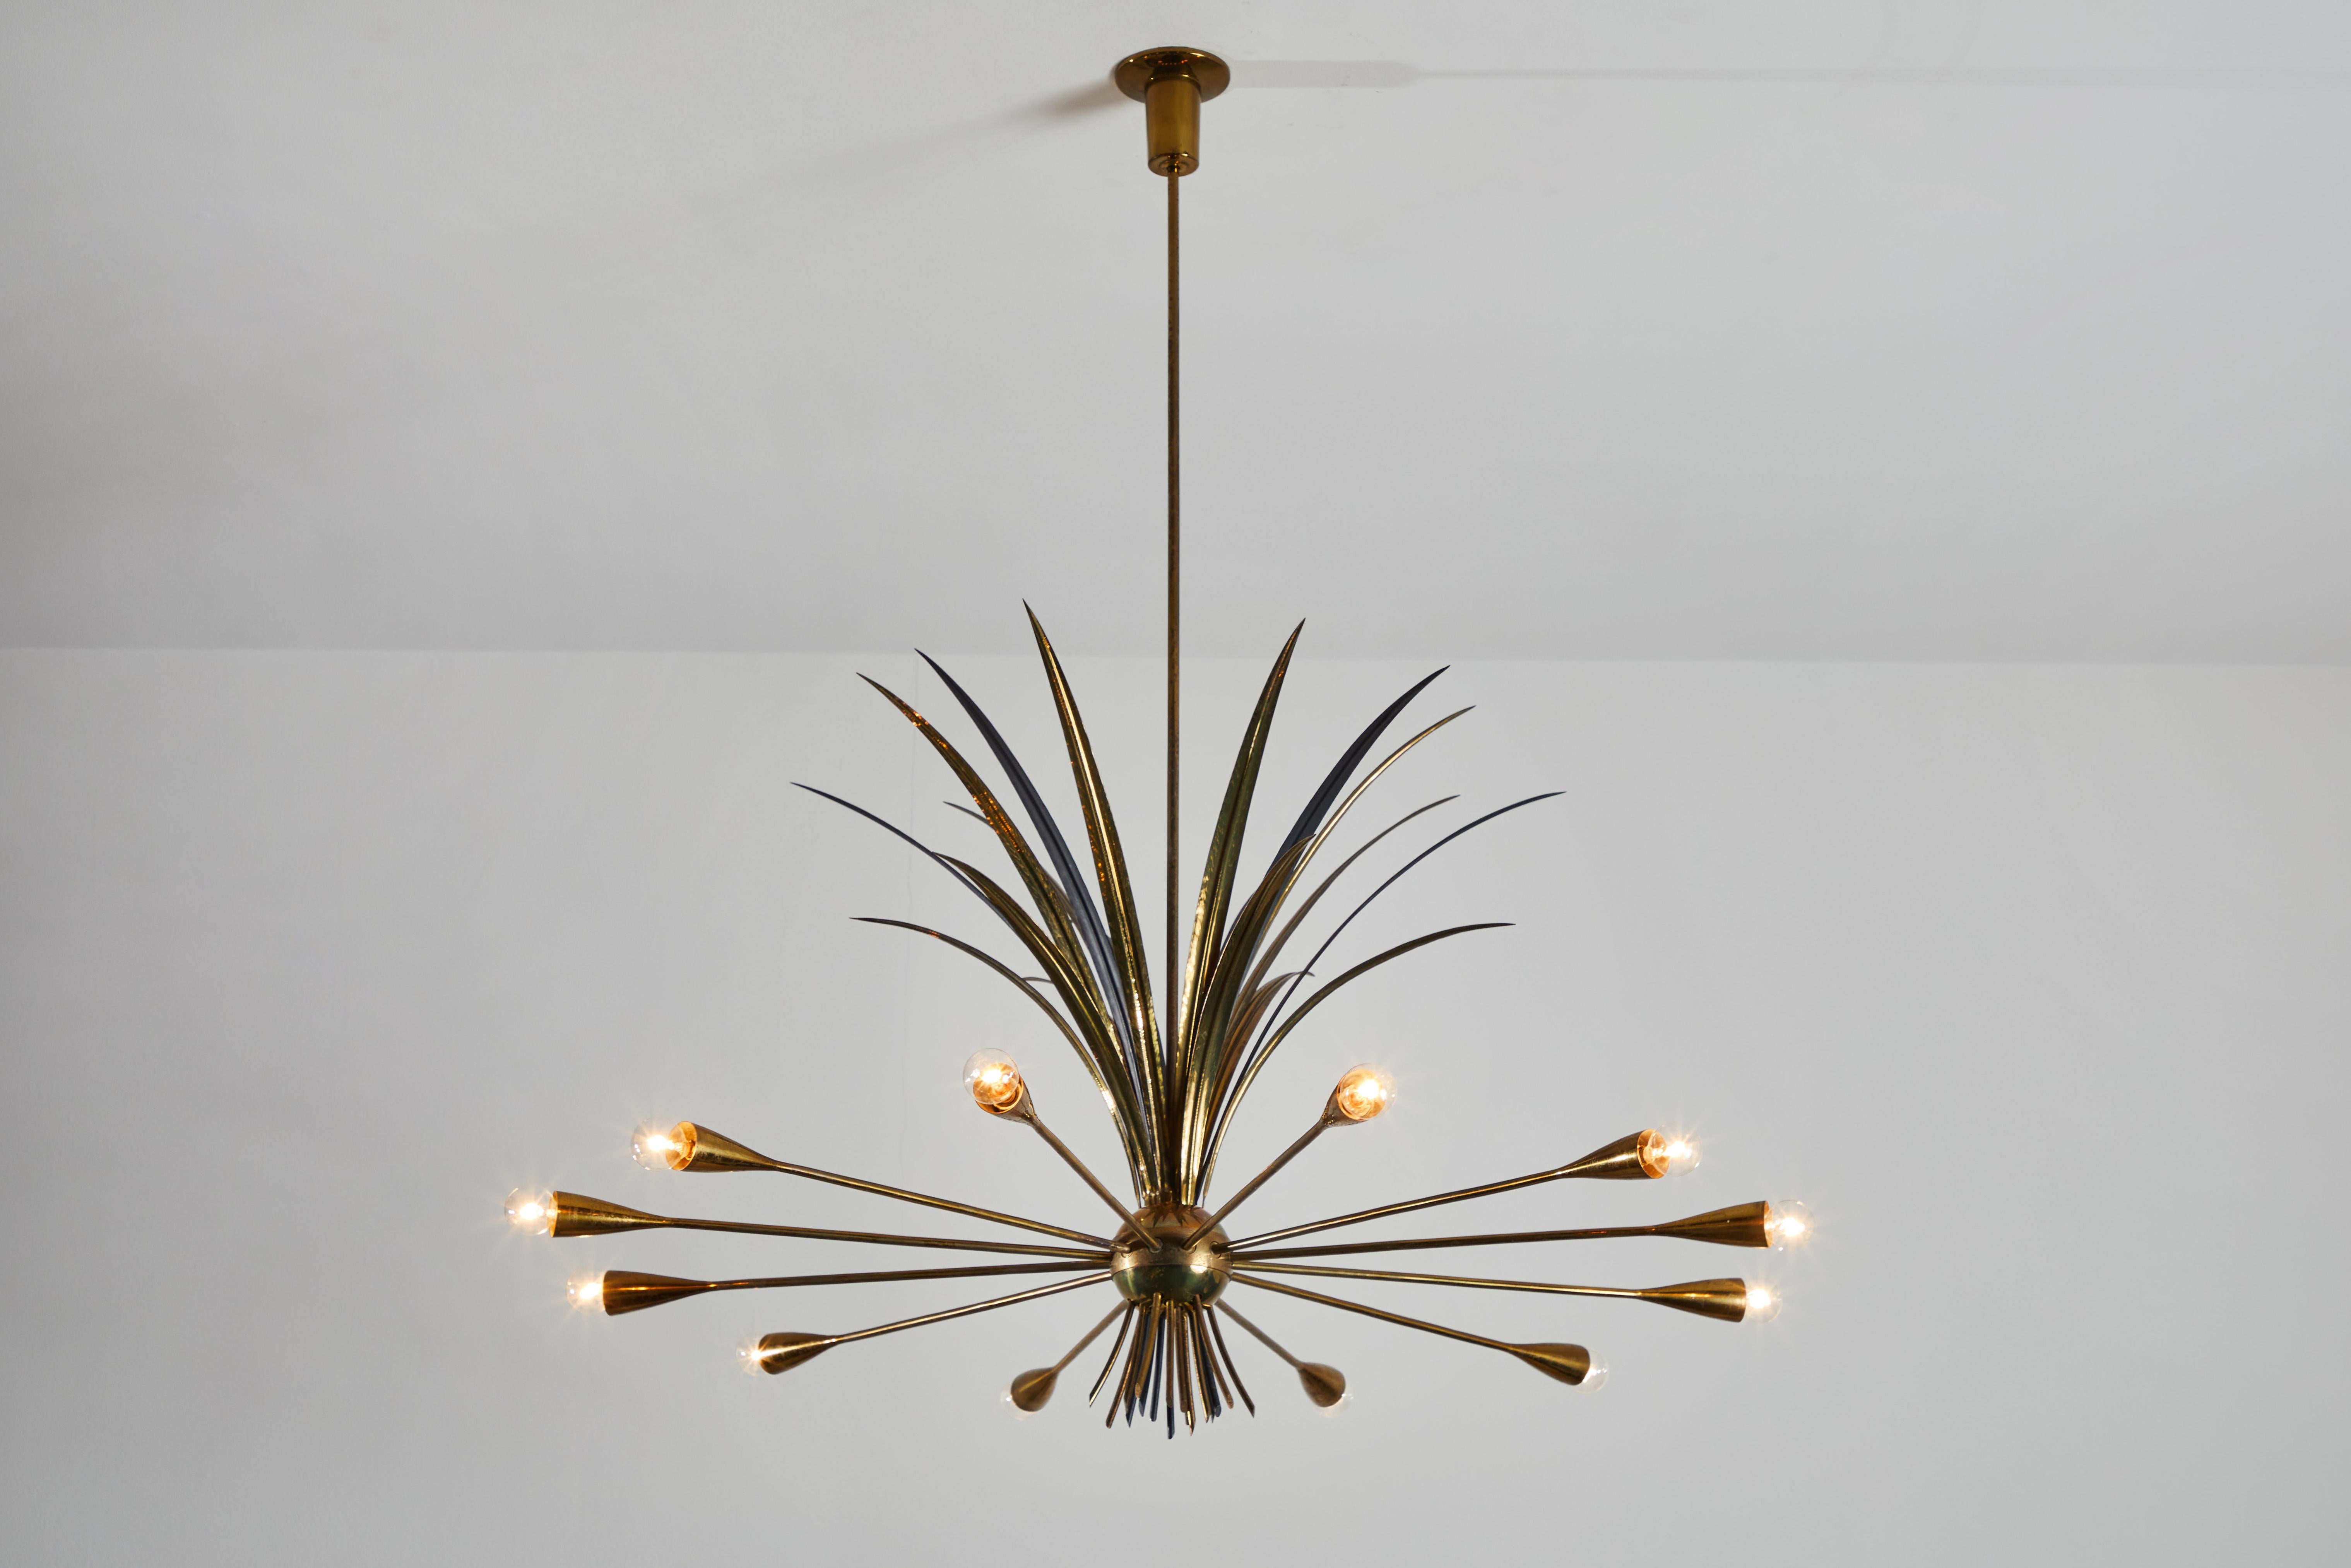 Rare chandelier by Angelo Lelli for Arredoluce. Designed and manufactured in Italy, circa 1950s. Brass, with painted brass. Rewired for U.S. junction boxes. Custom brass ceiling plate. Takes twelve E27 25w maximum candelabra bulbs. Certified by the